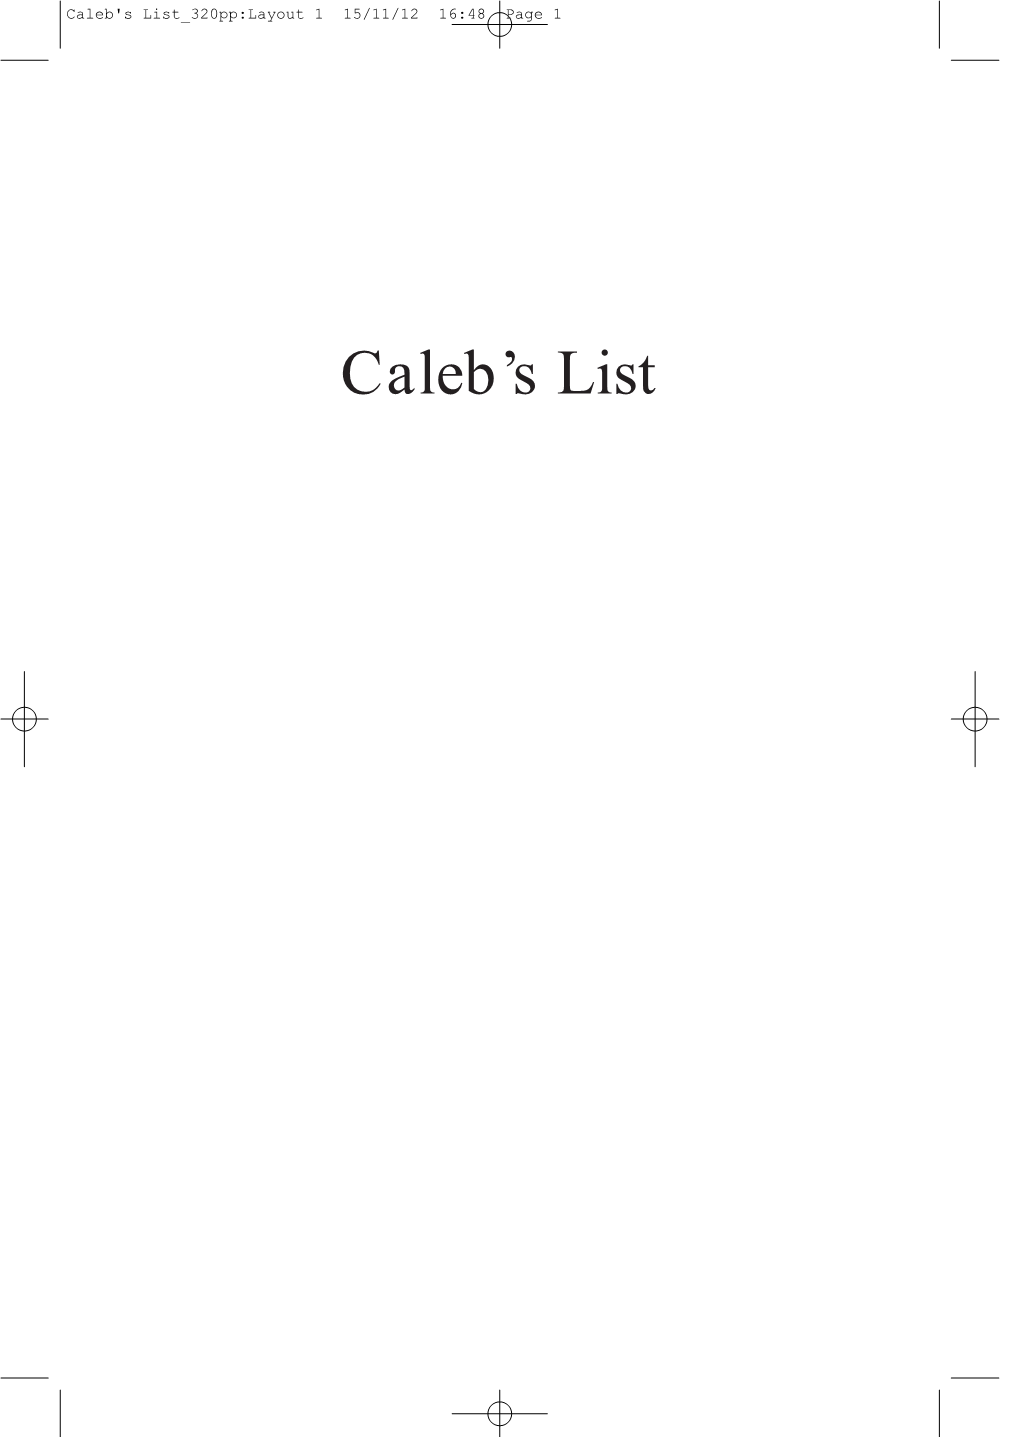 Caleb's List 320Pp:Layout 1 15/11/12 16:48 Page 1